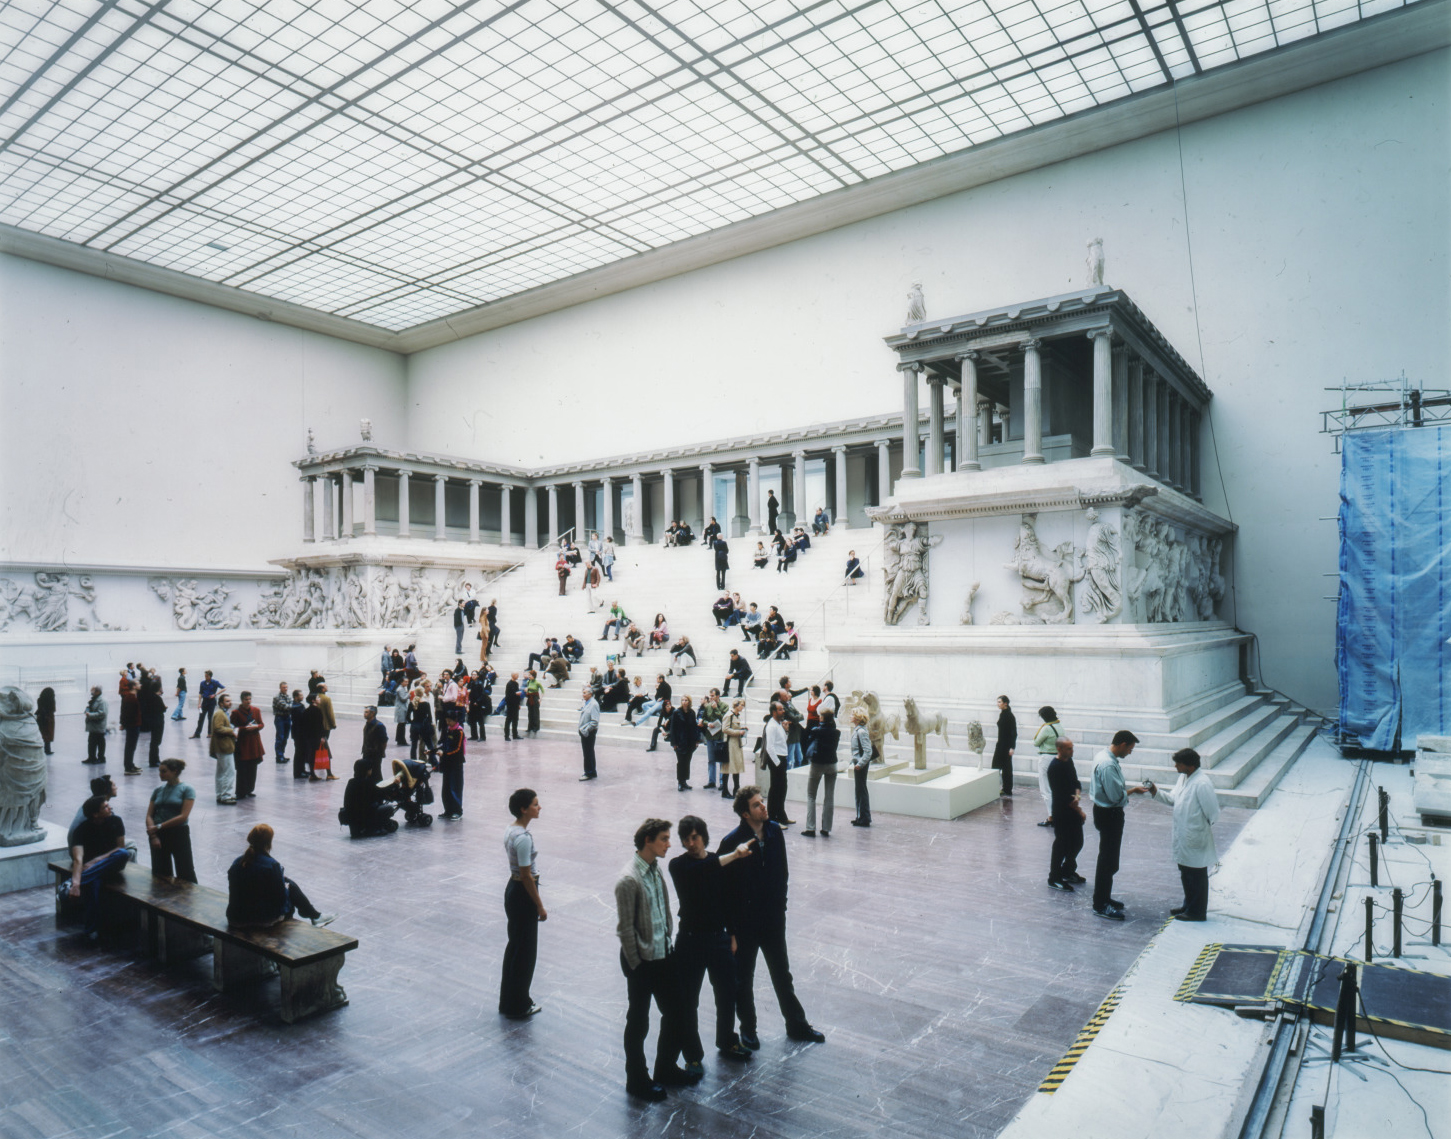 Thomas Struth, Pergamon Museum I, Berlin (Museo Pérgamo I, Berlina), 2001. C-print. Museum purchase with funds provided by The Levitt Family, in honor of Norman and Betty Levitt, and Contemporary Forum.